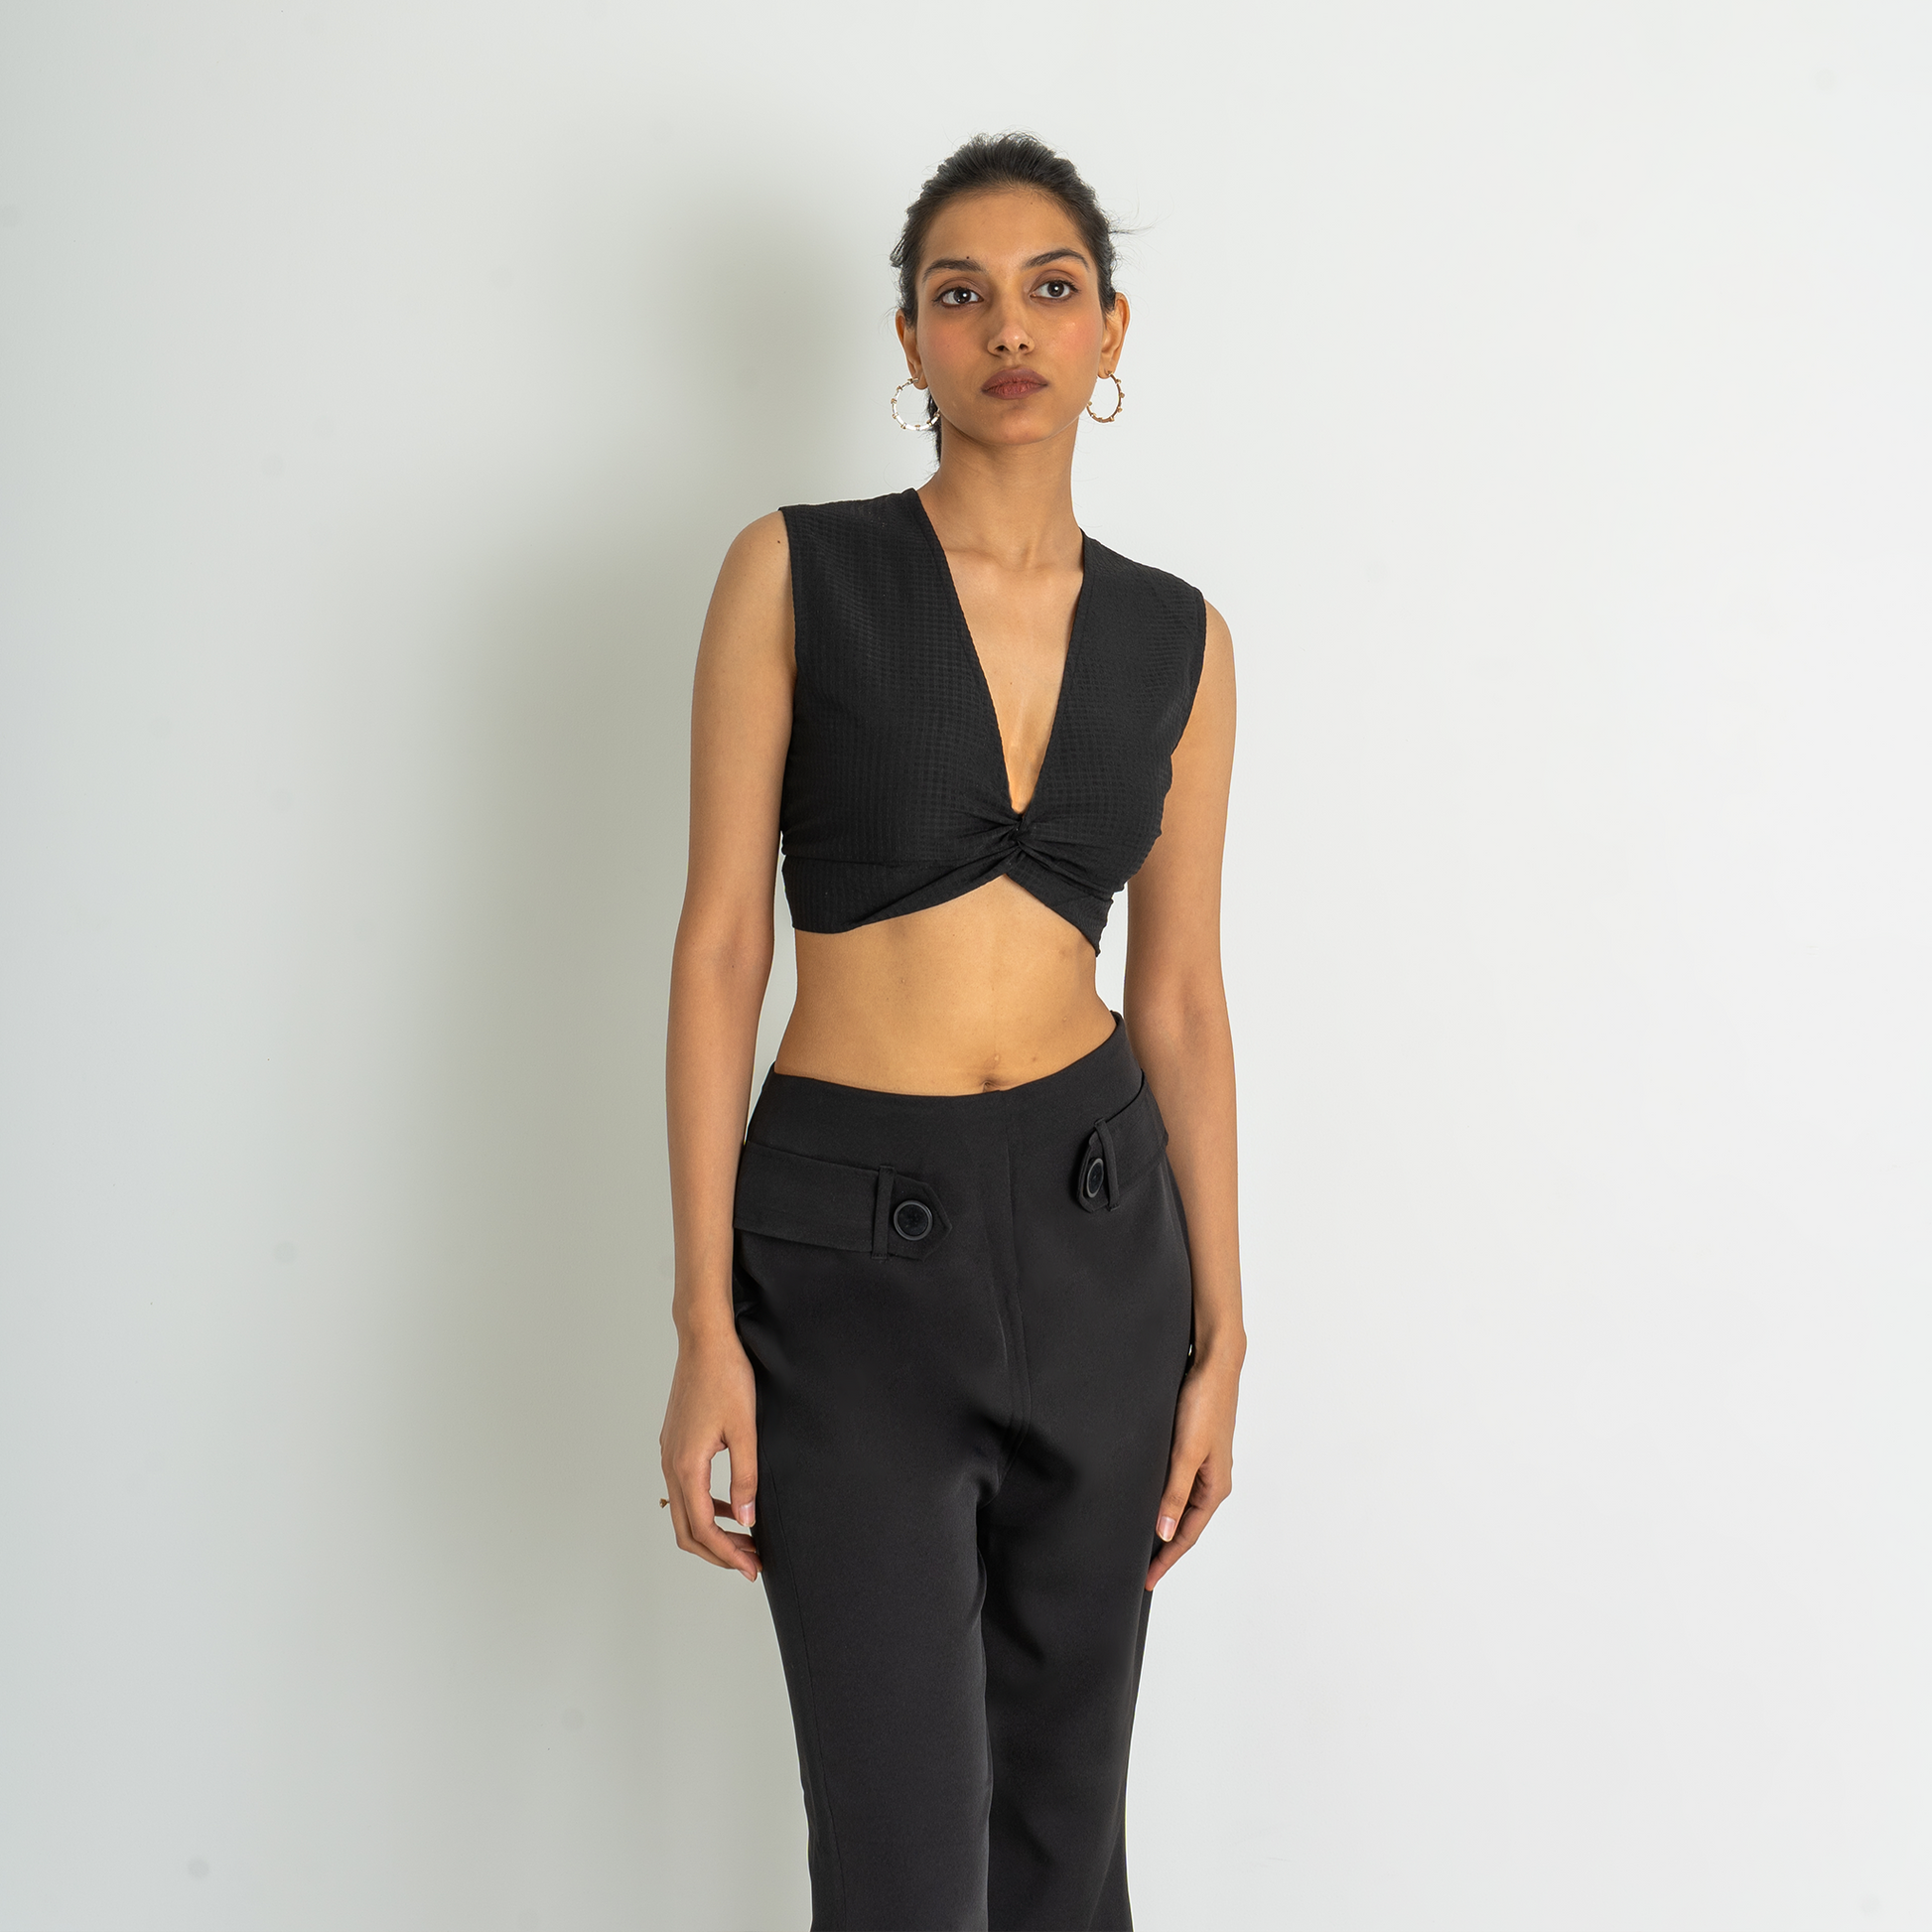 Cropped blouse in woven fabric made from cotton with a deep, V-shaped neckline and a decorative knot detail at the front. Sleeveless and a partially open back with a hook-and-eye fastener at the top and wide ties at the hem.